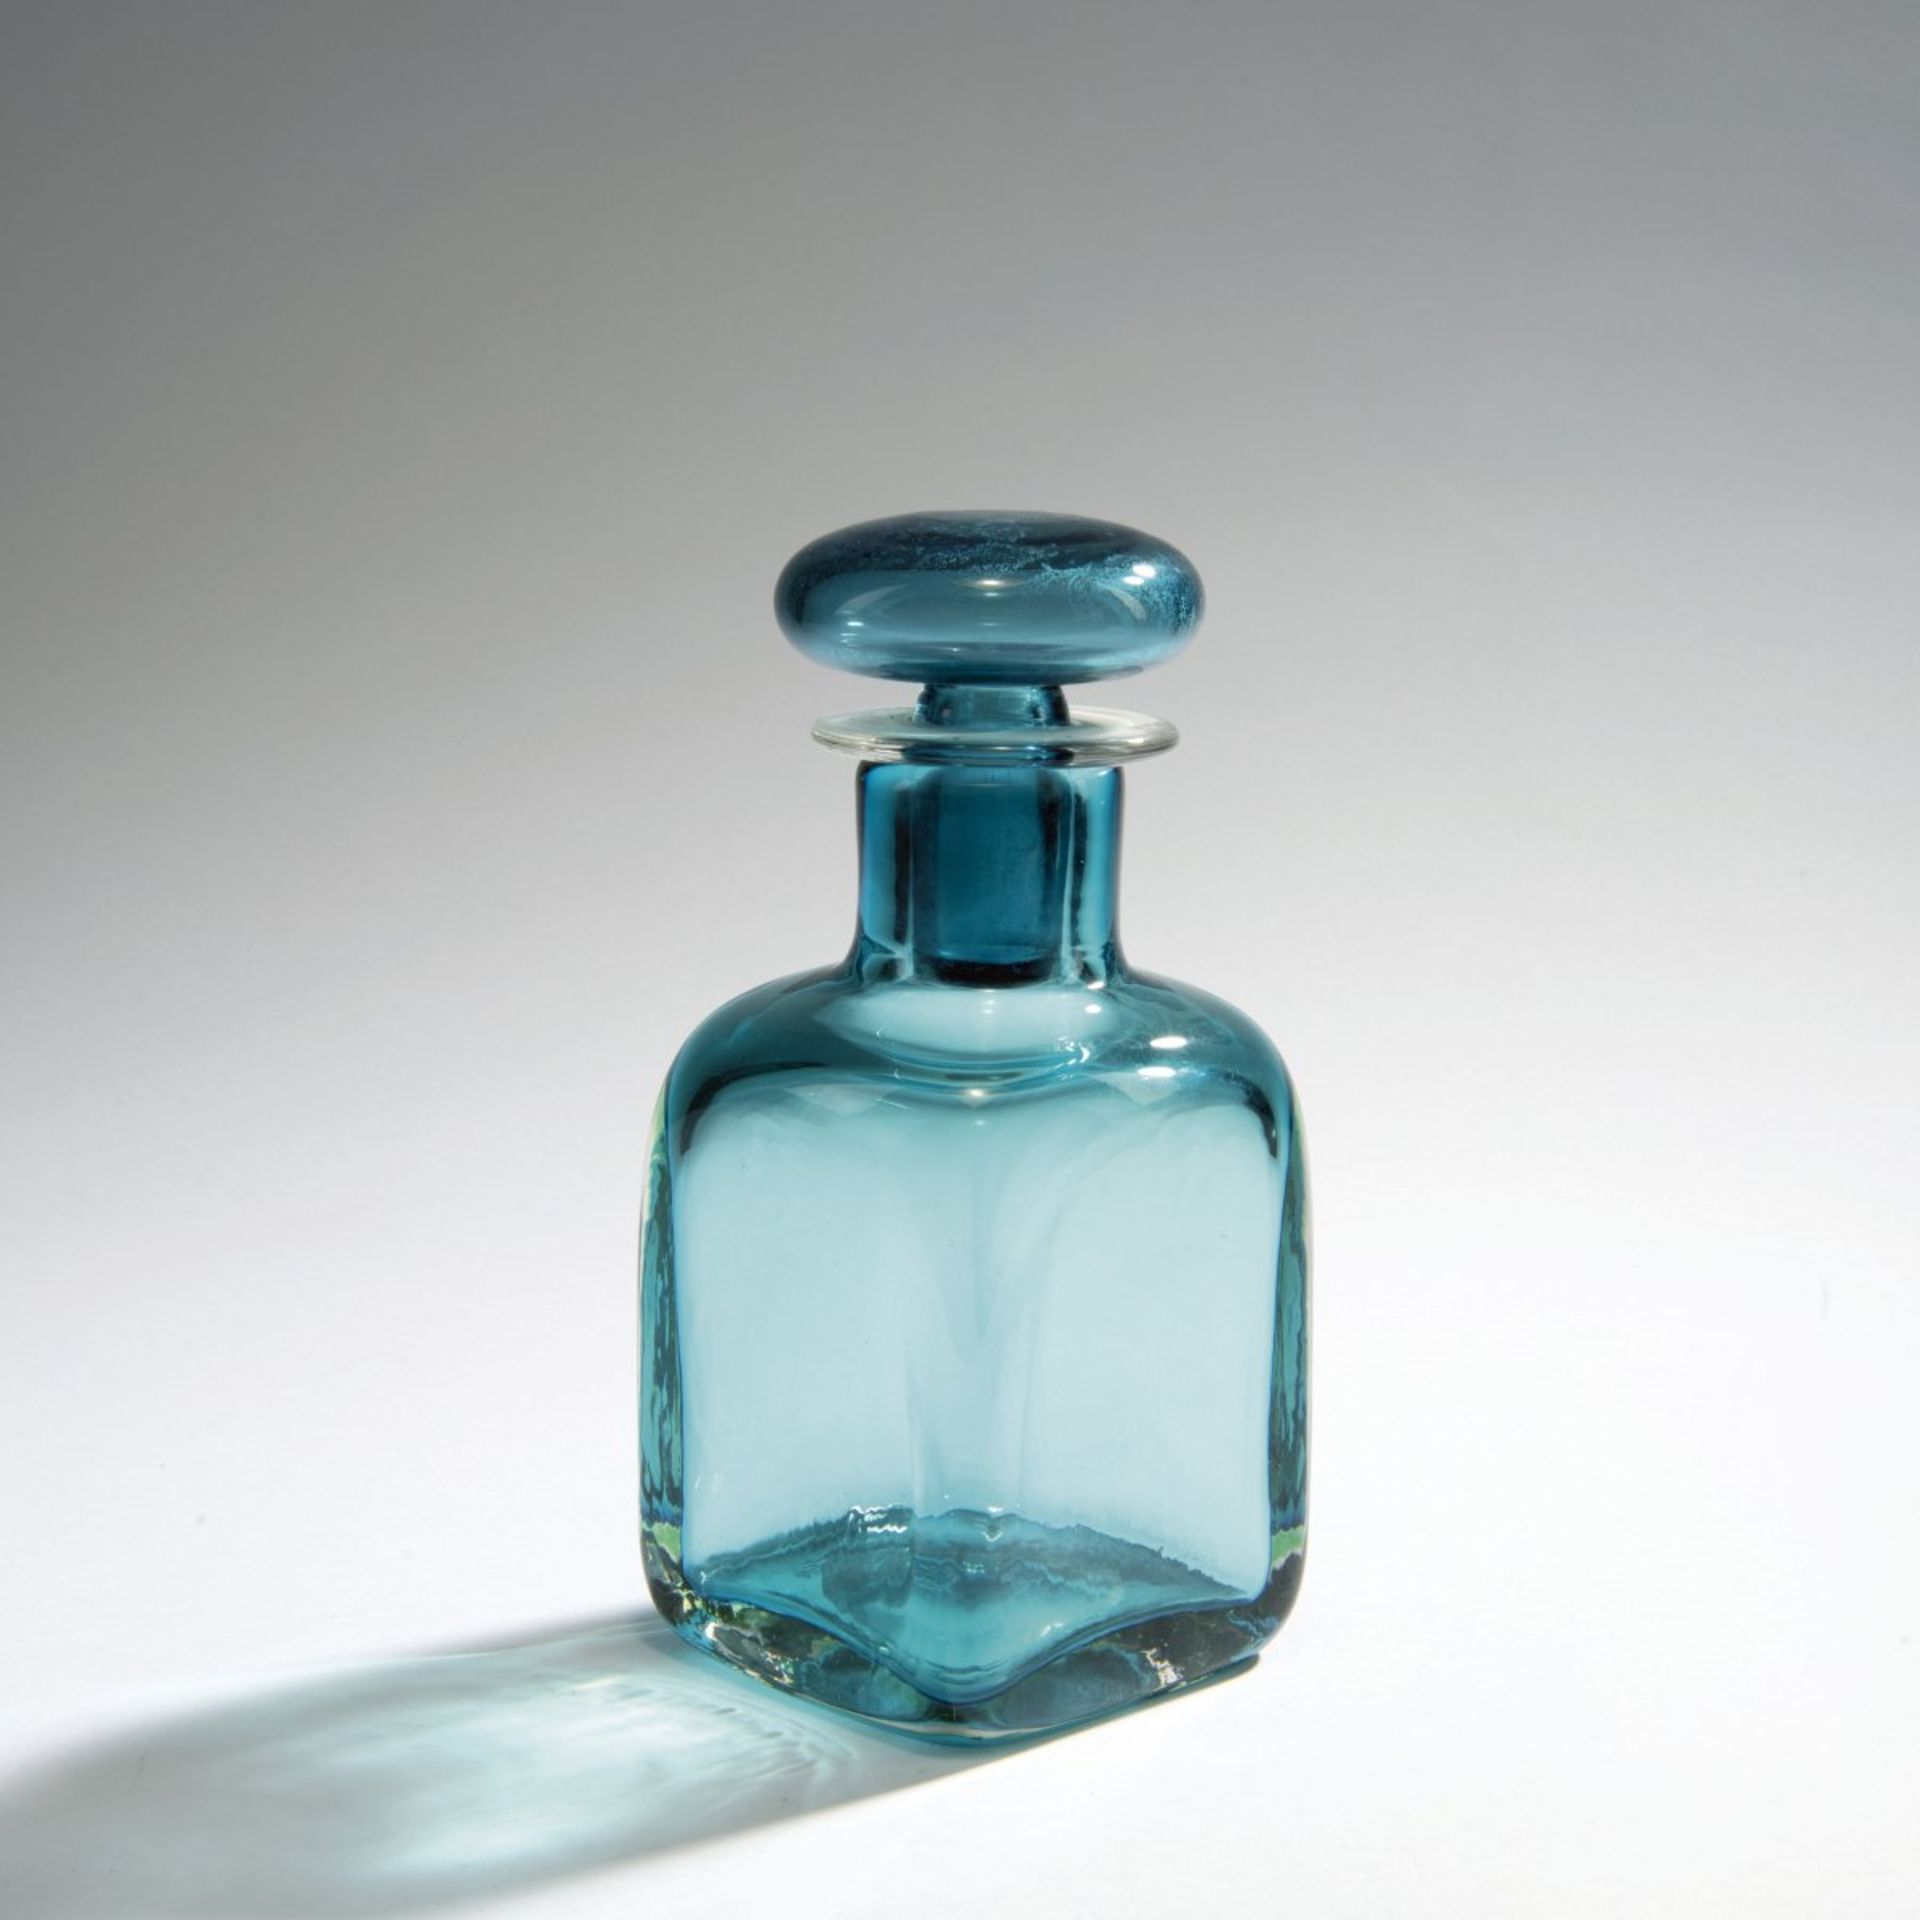 Paolo Venini, Bottle with stopper, 1959